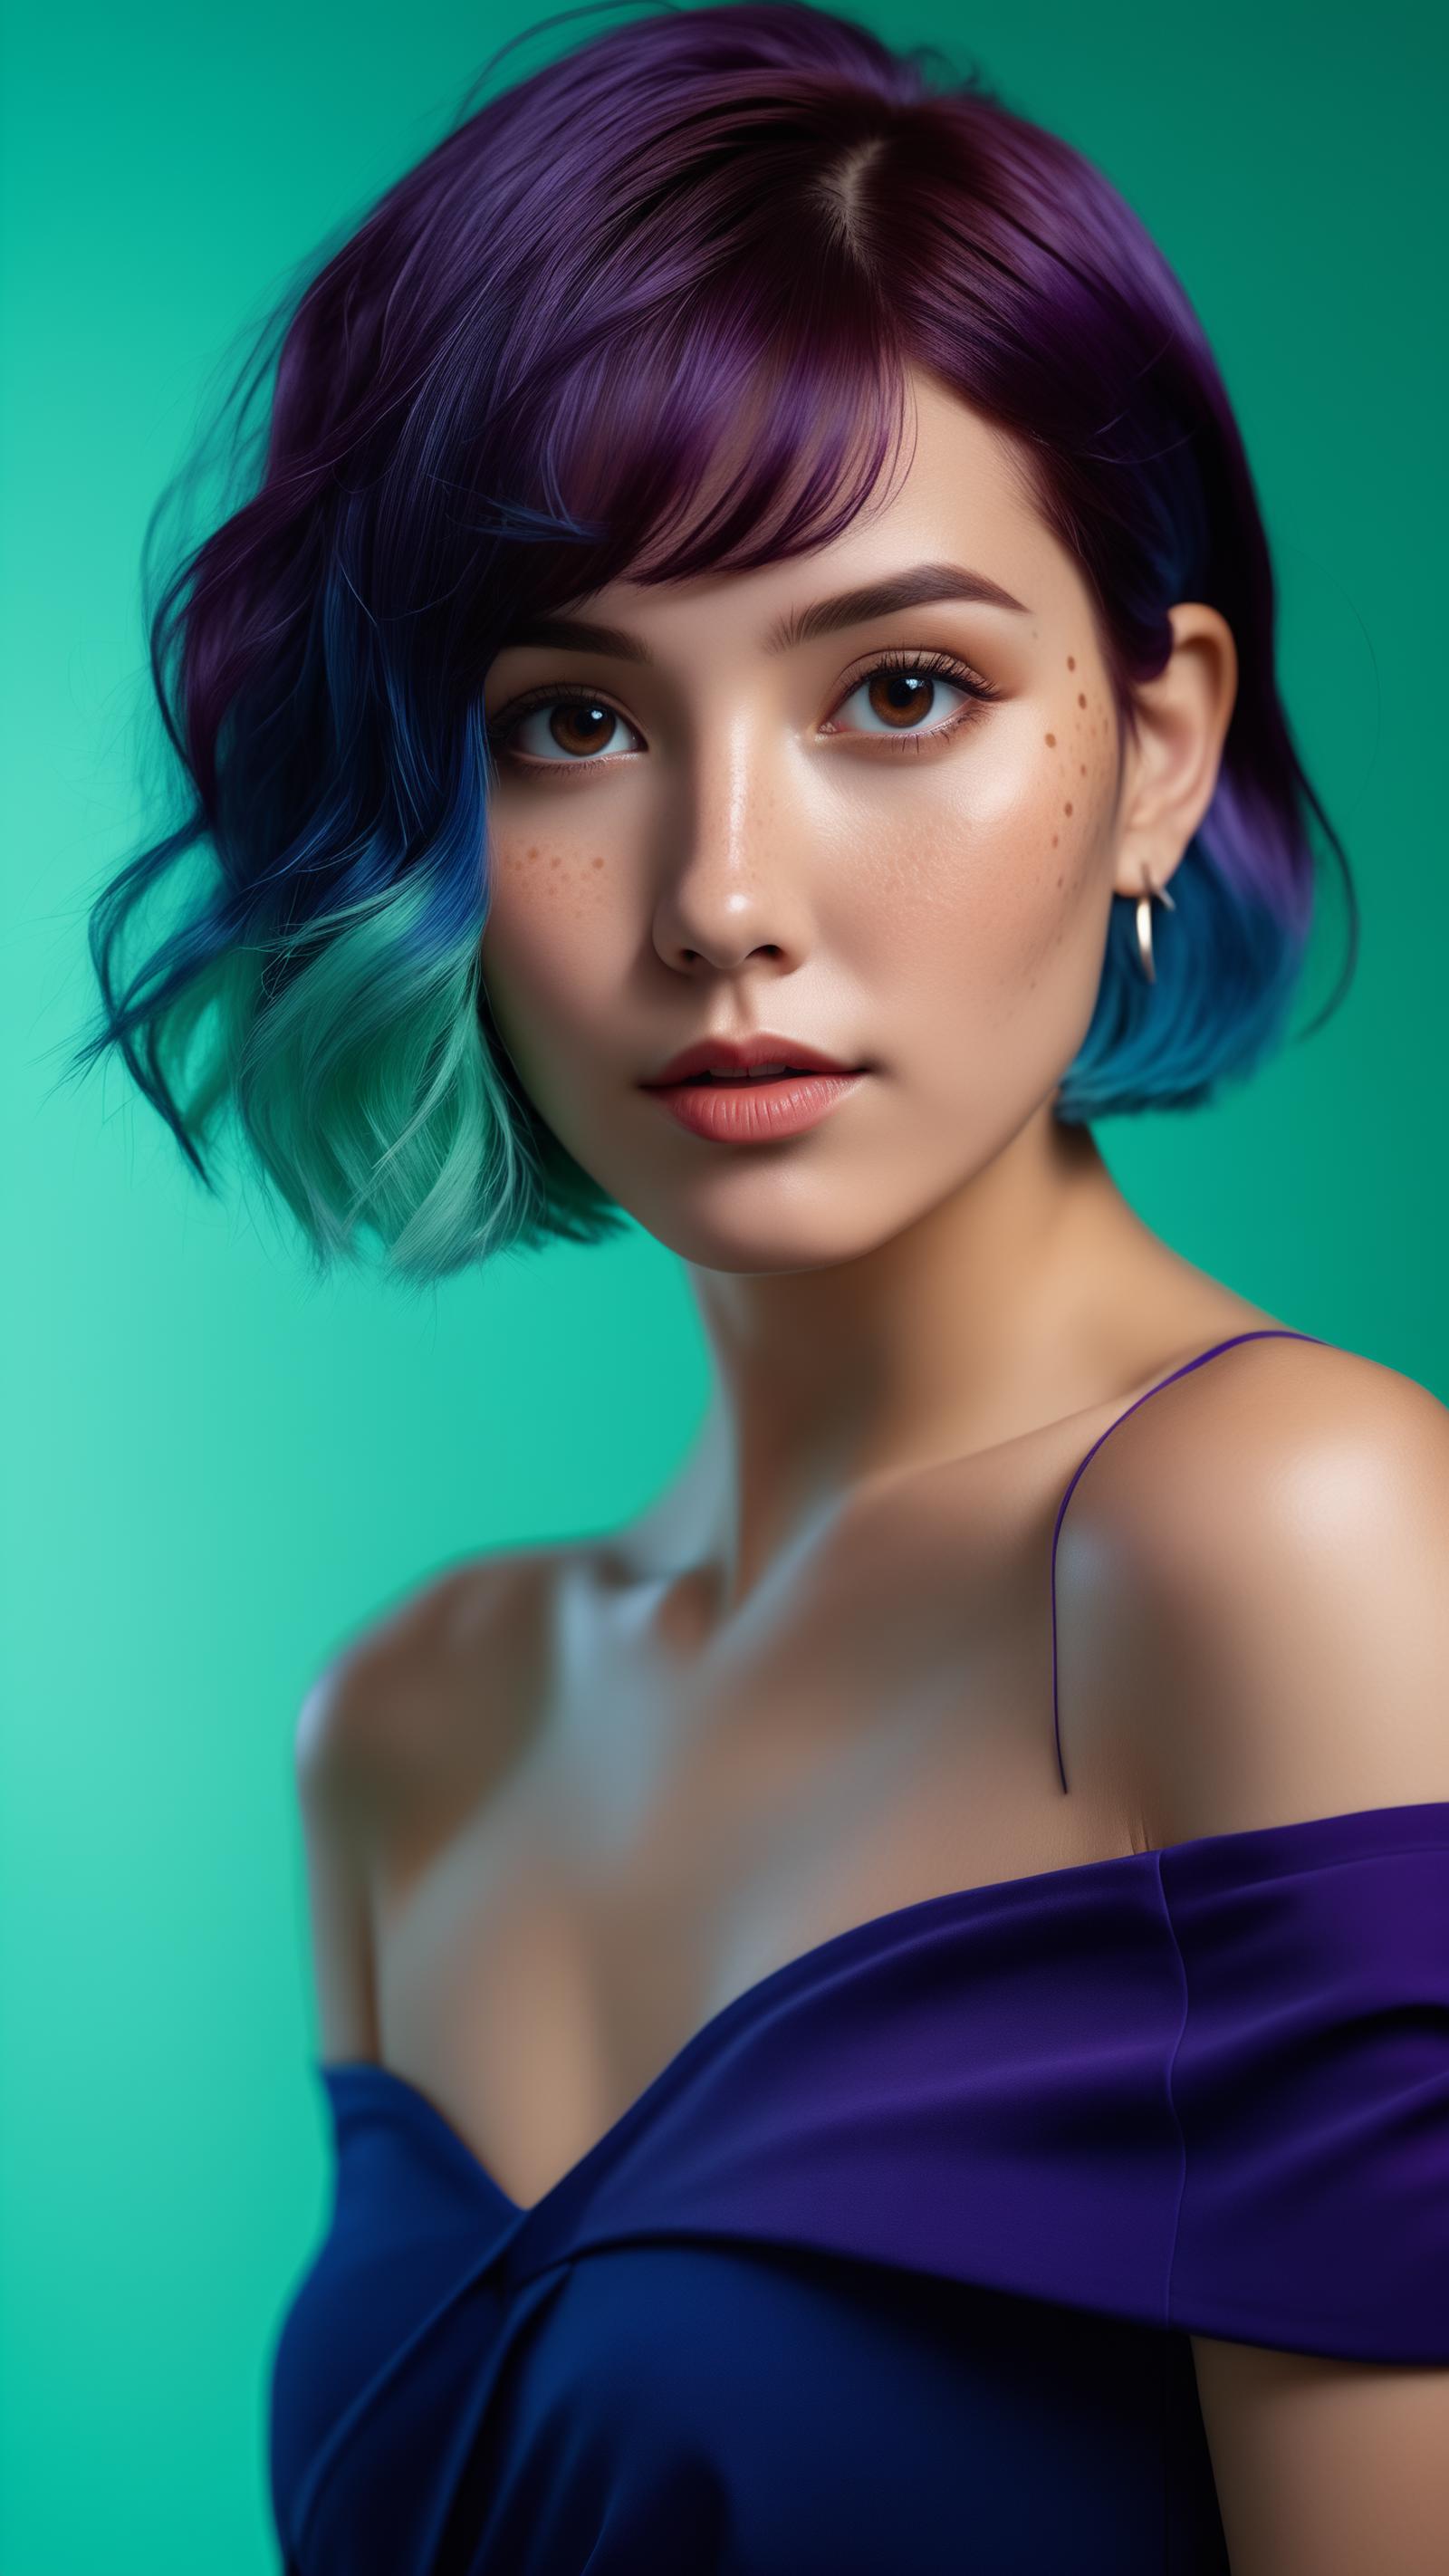 A woman with blue hair and purple lipstick posing for a portrait.